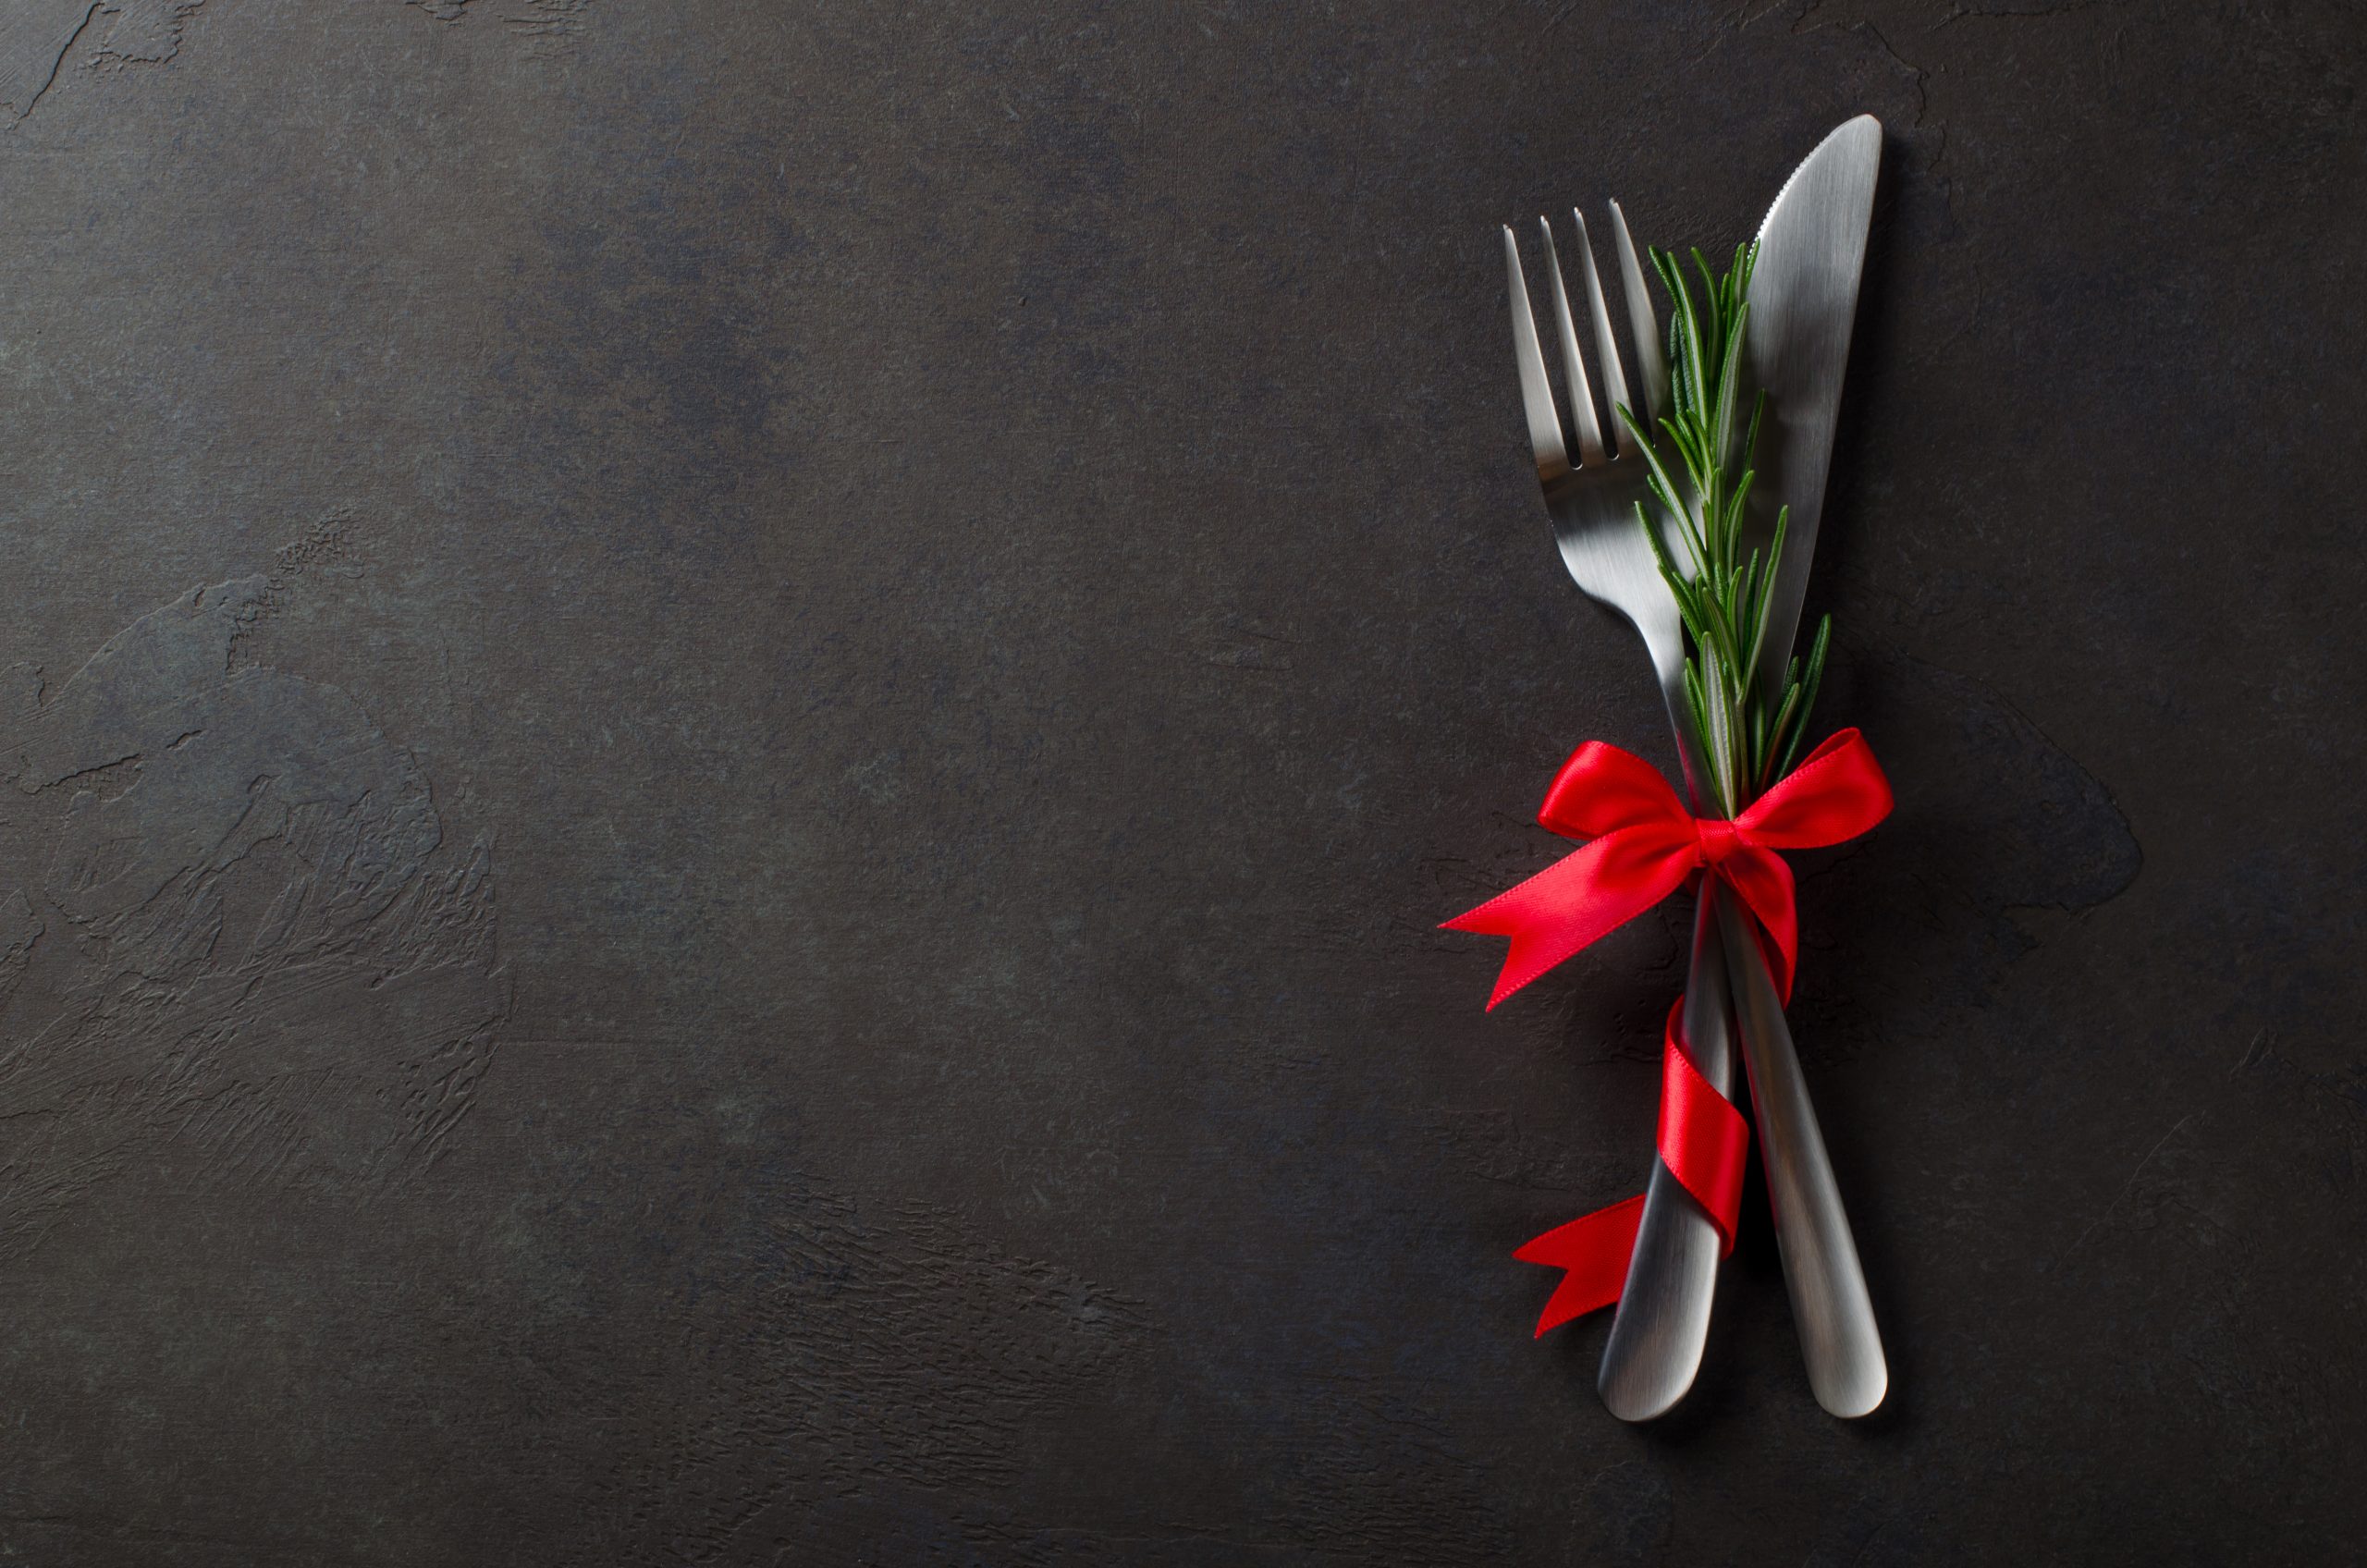 Festive set of knife and fork with red satin bow with rosemary, dark stone slate background, top view, copyspace, horizontal image